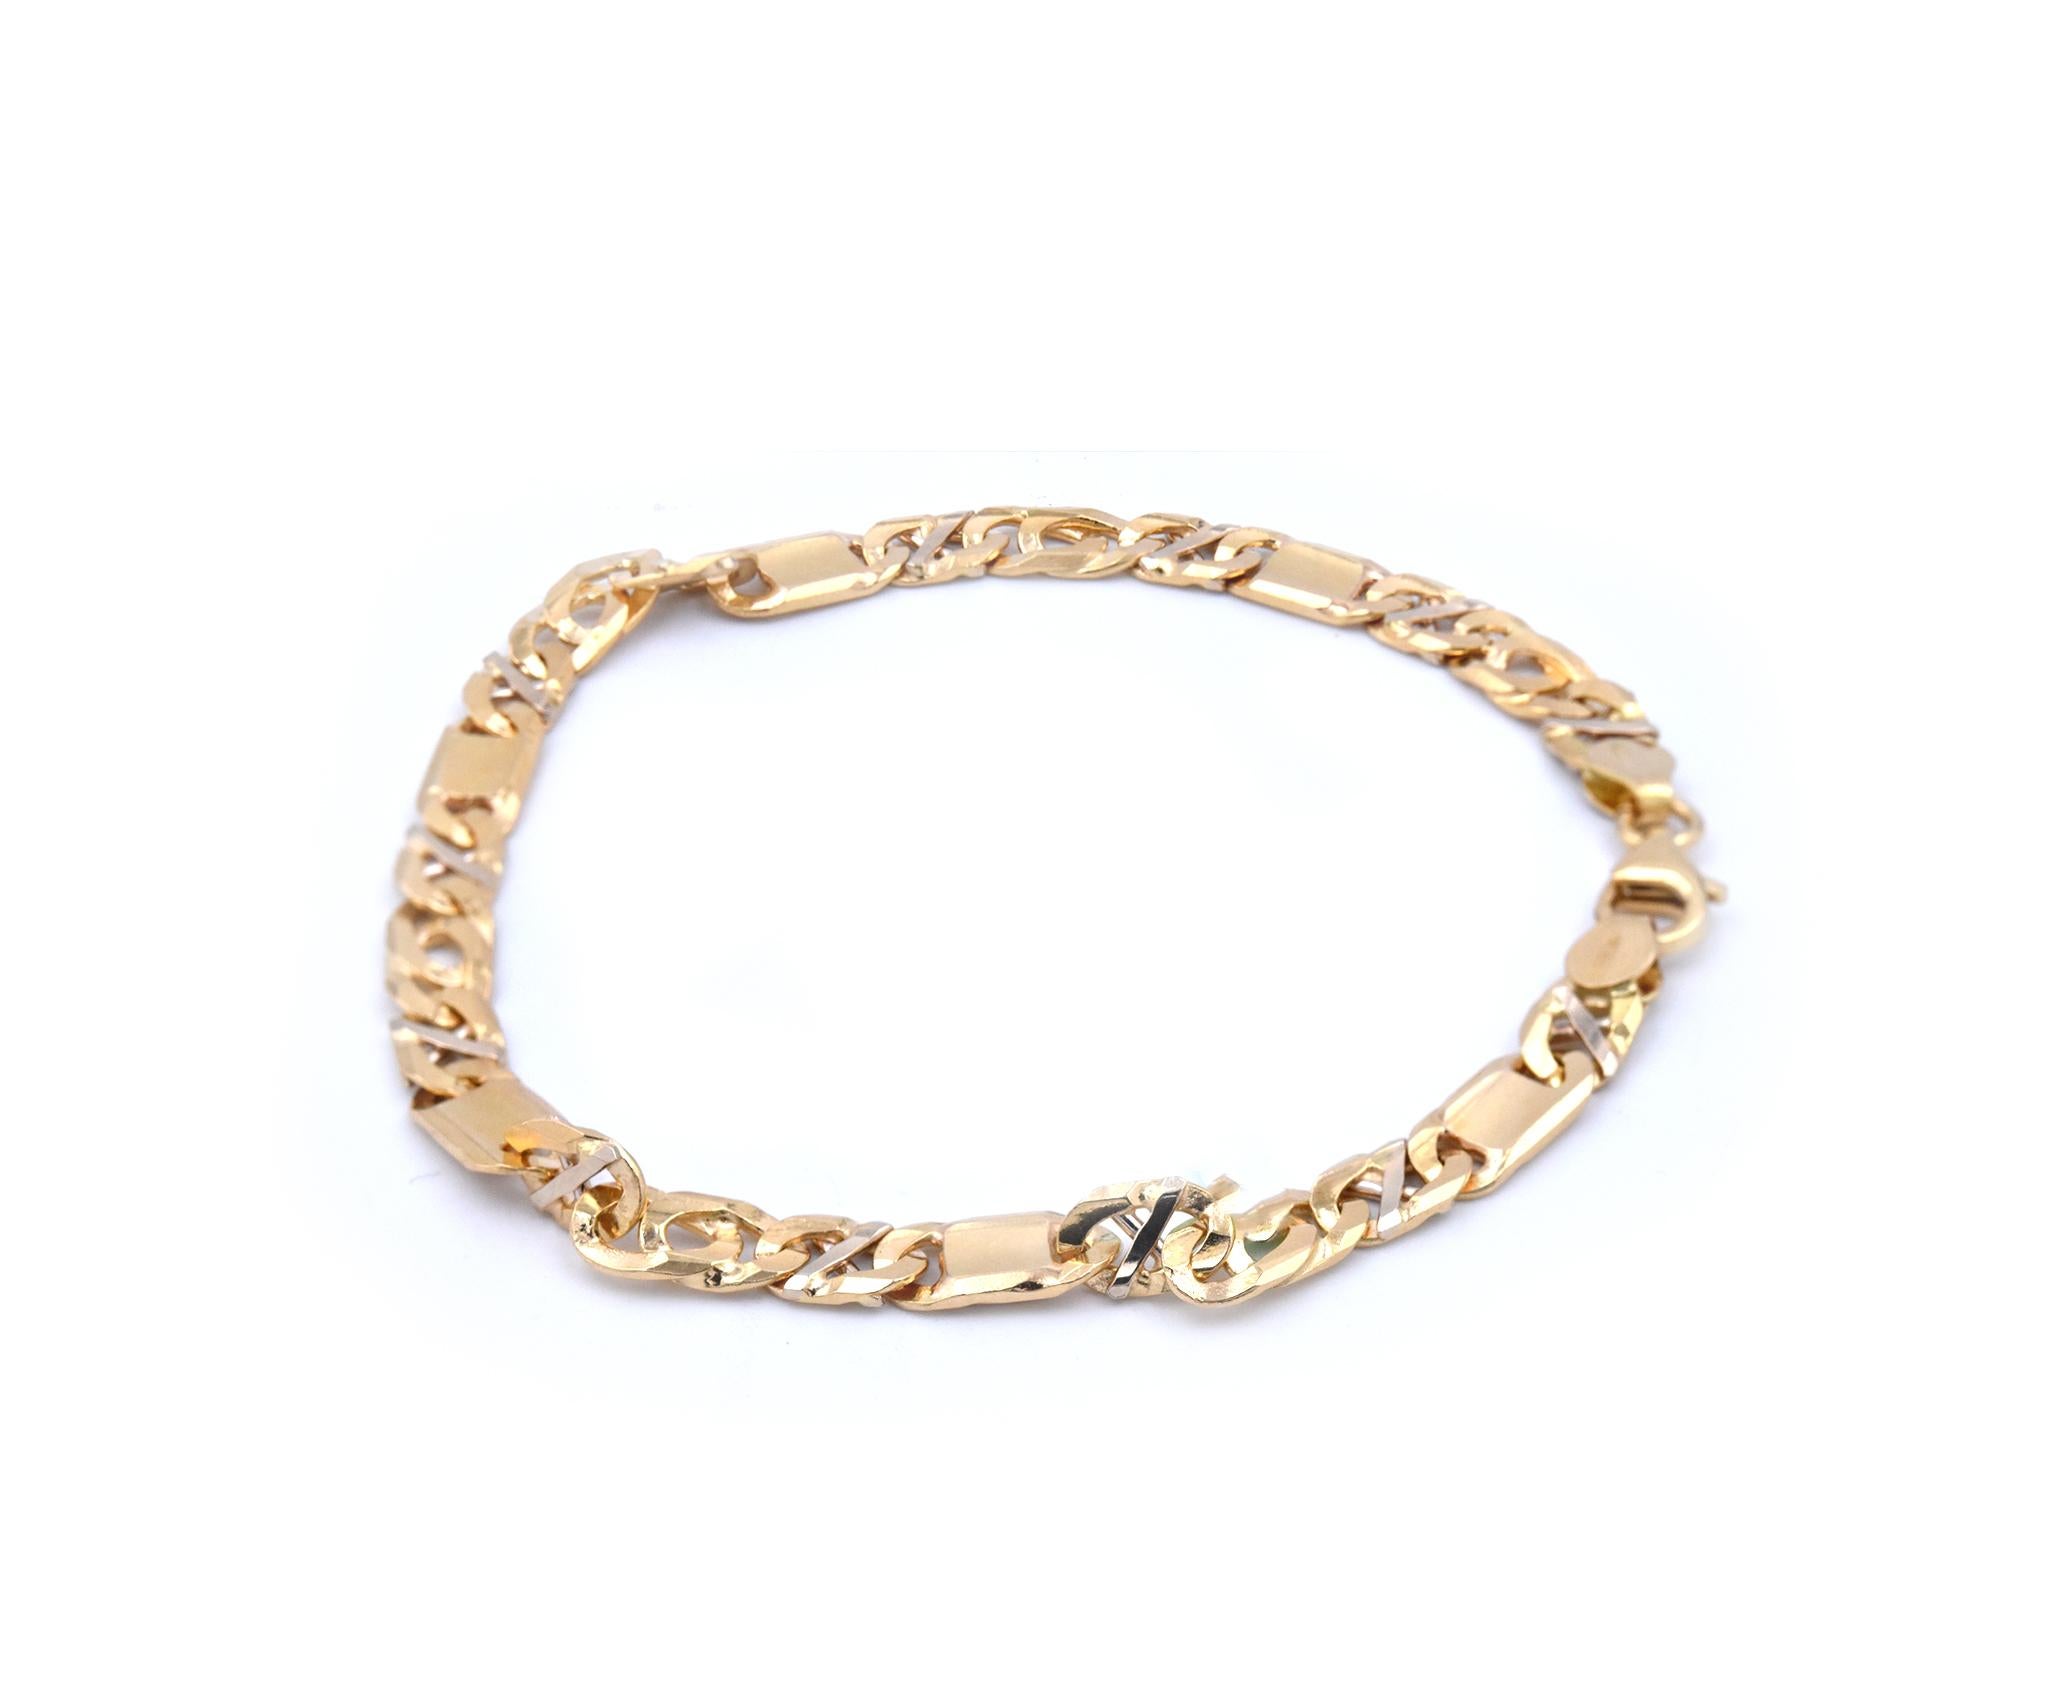 Designer: Custom Design
Material: 18k yellow gold
Dimensions: bracelet measures 8-inches in length, 6mm in width
Weight: 15.4 grams